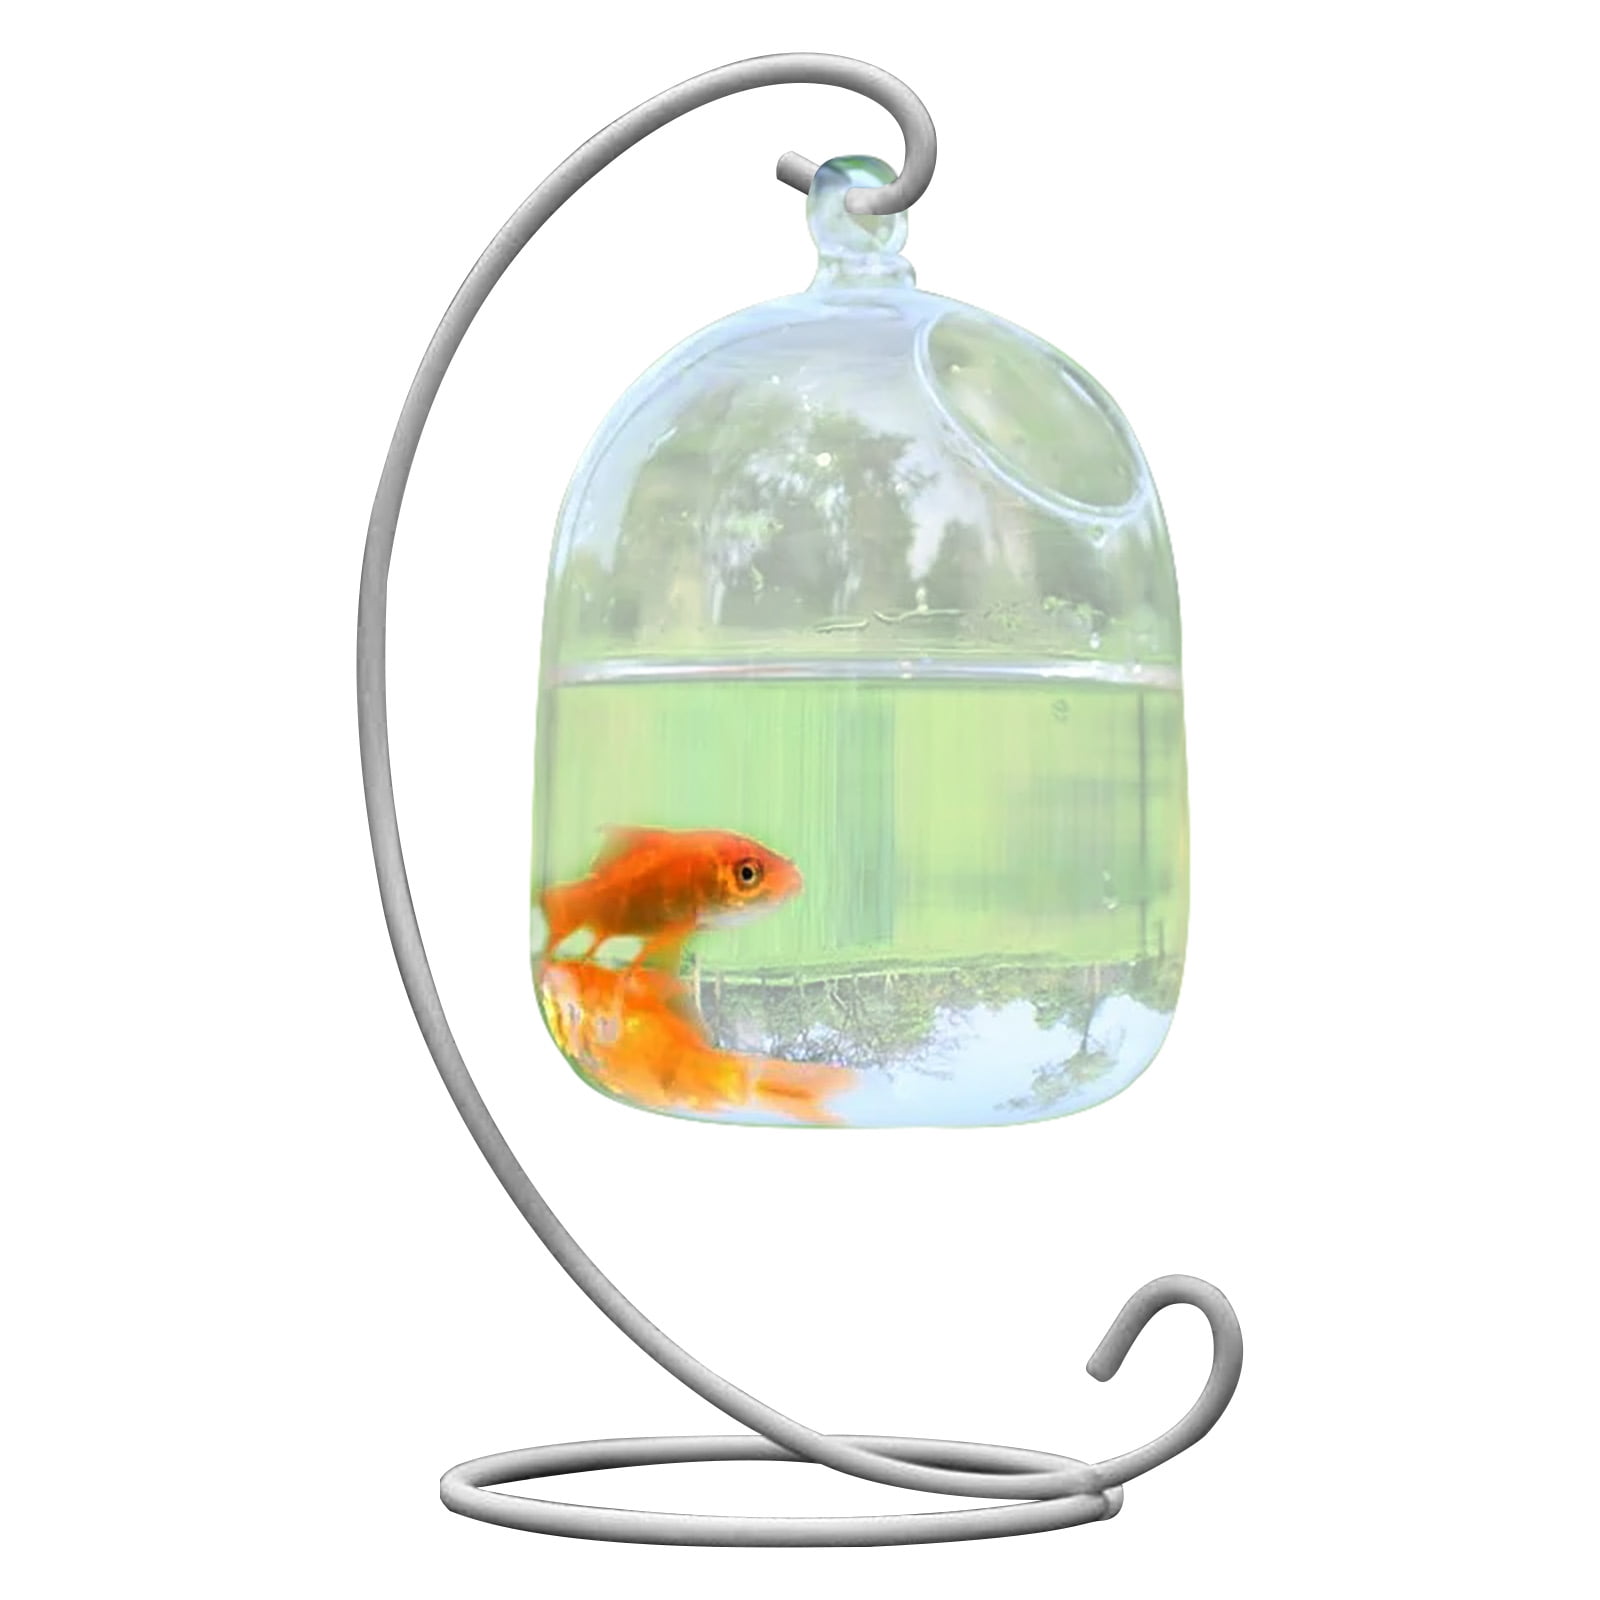 Hapeisy Desk Hanging Fish Tank Bowl with Stand, Small Table Top